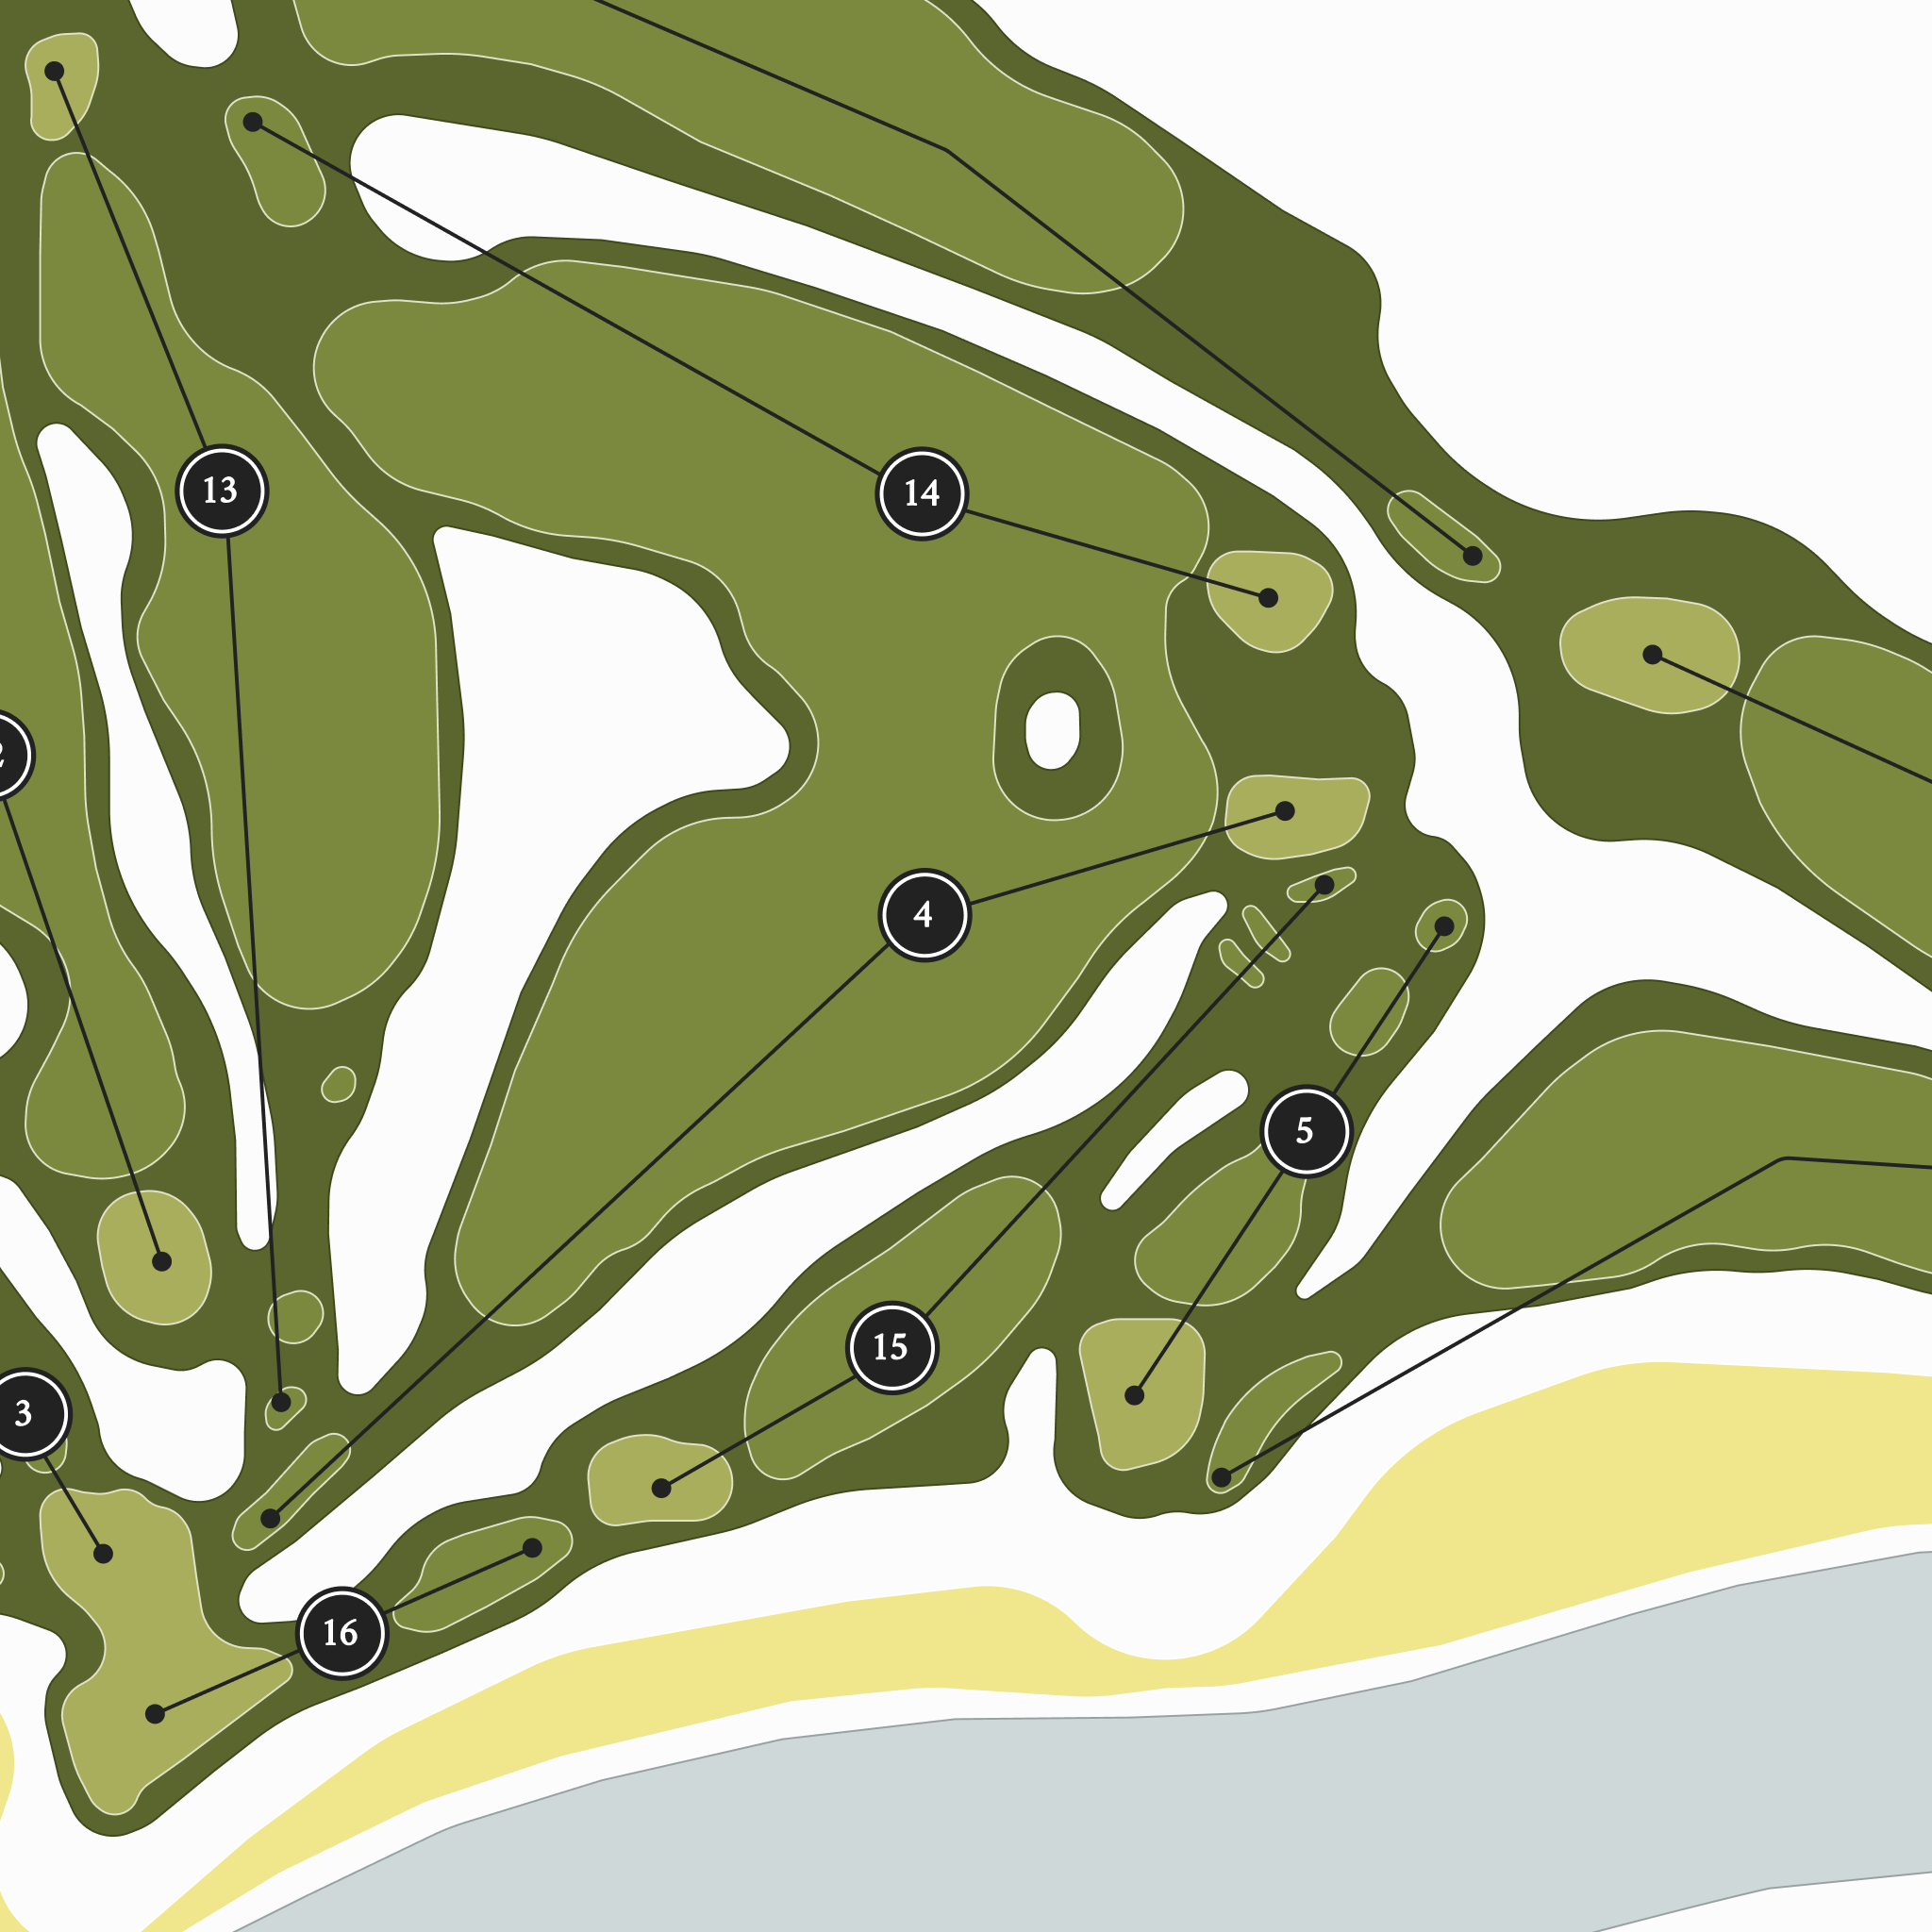 Sheep Ranch| Golf Course Print | Close Up With Hole Numbers #hole numbers_yes